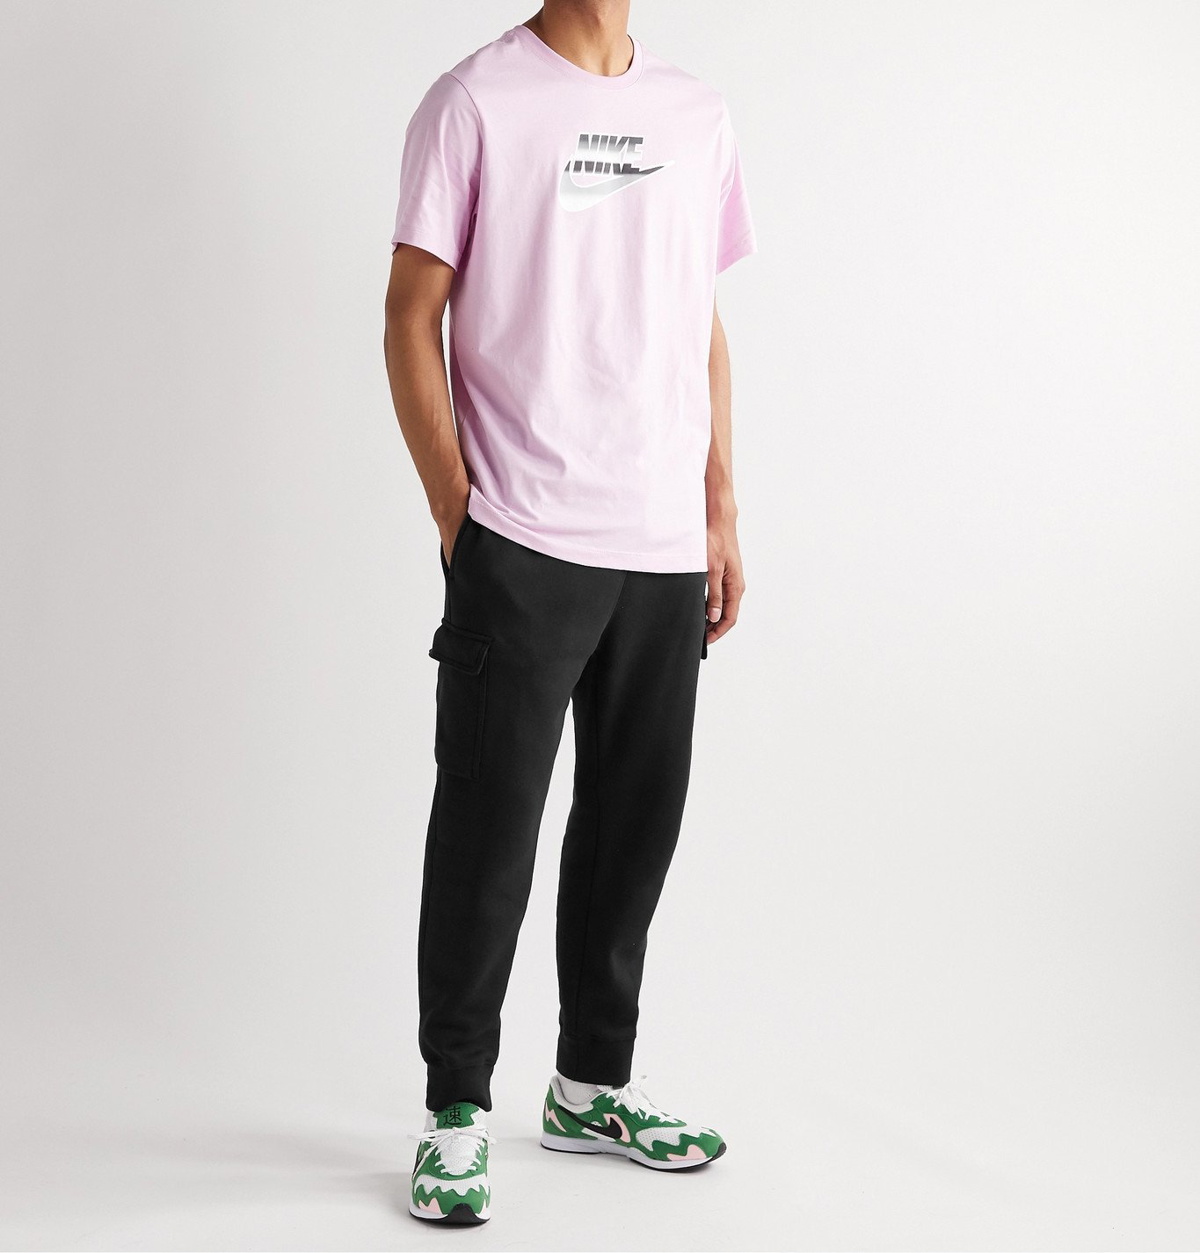 Nike Club fleece cargo joggers in white with pink logo